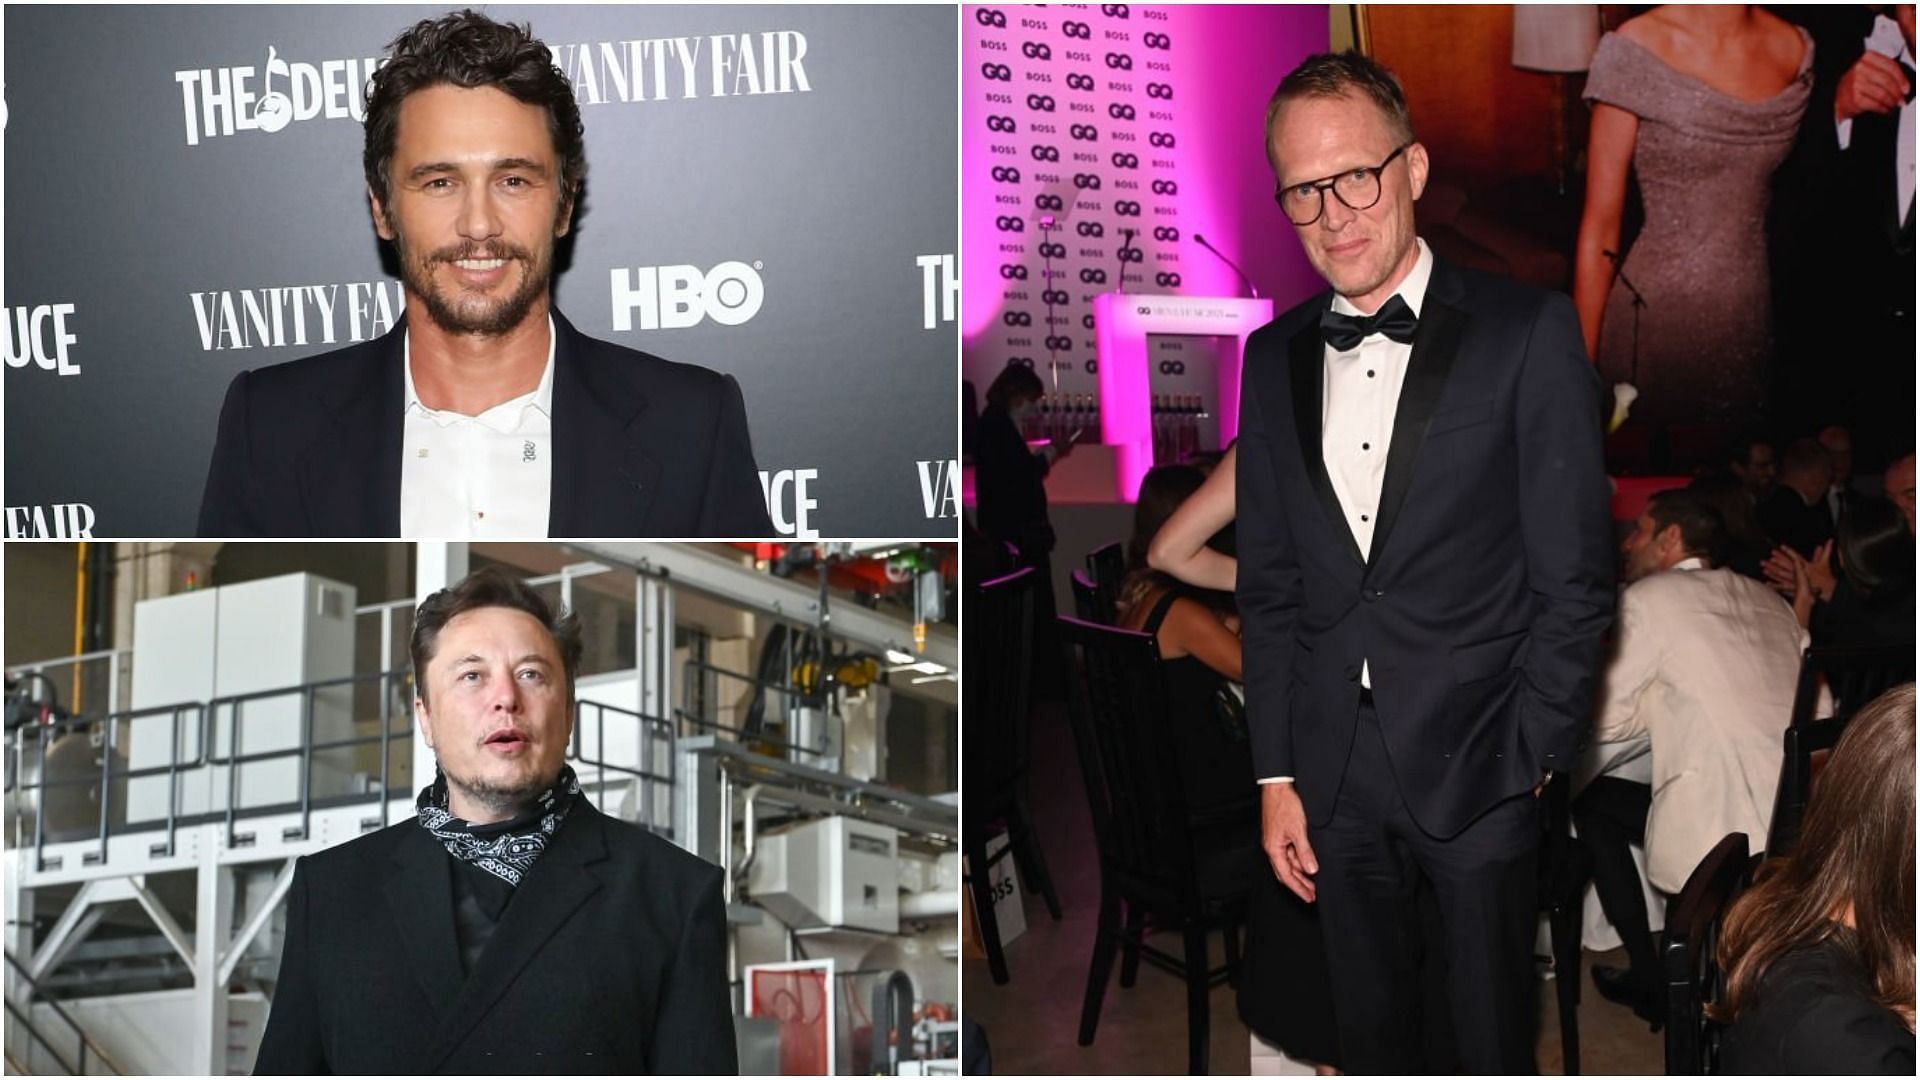 James Franco, Elon Musk, and Paul Bettany&#039;s names are also included in the witness list (Images via Taylor Hill, Patrick Pleul and David M. Benett/Getty Images)